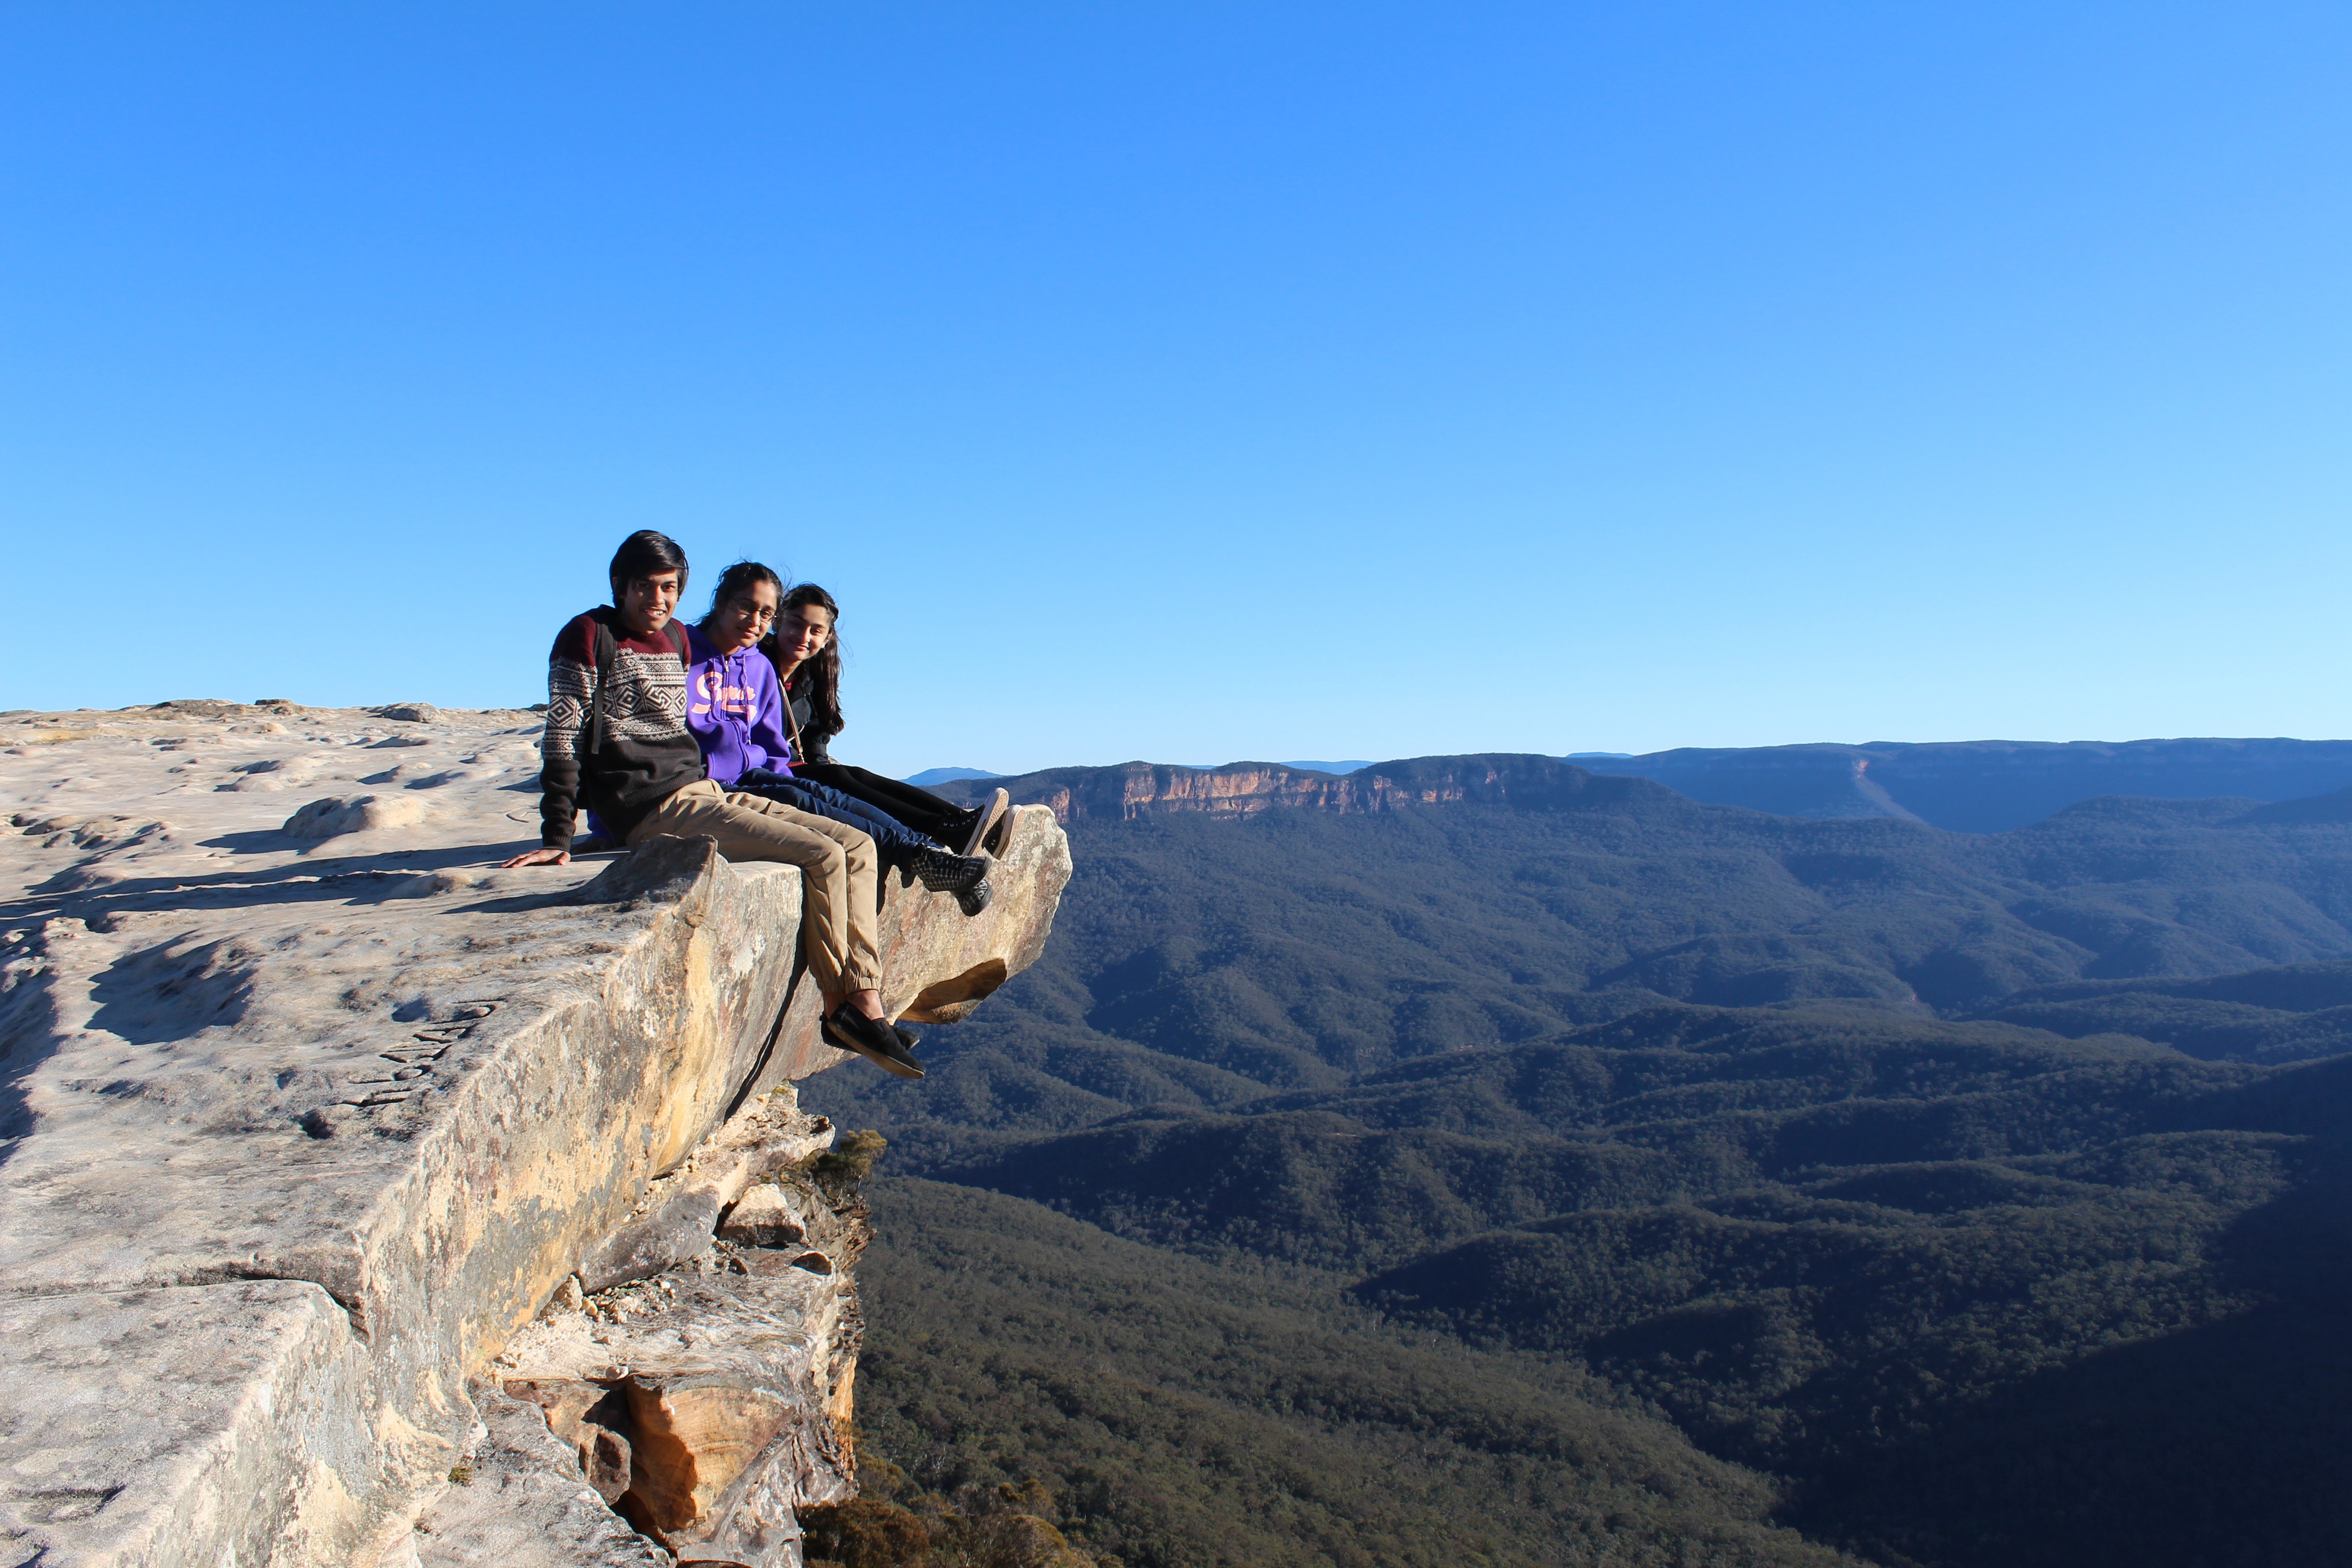 Sitting on the cliff edge of The Blue Mountains, Sydney